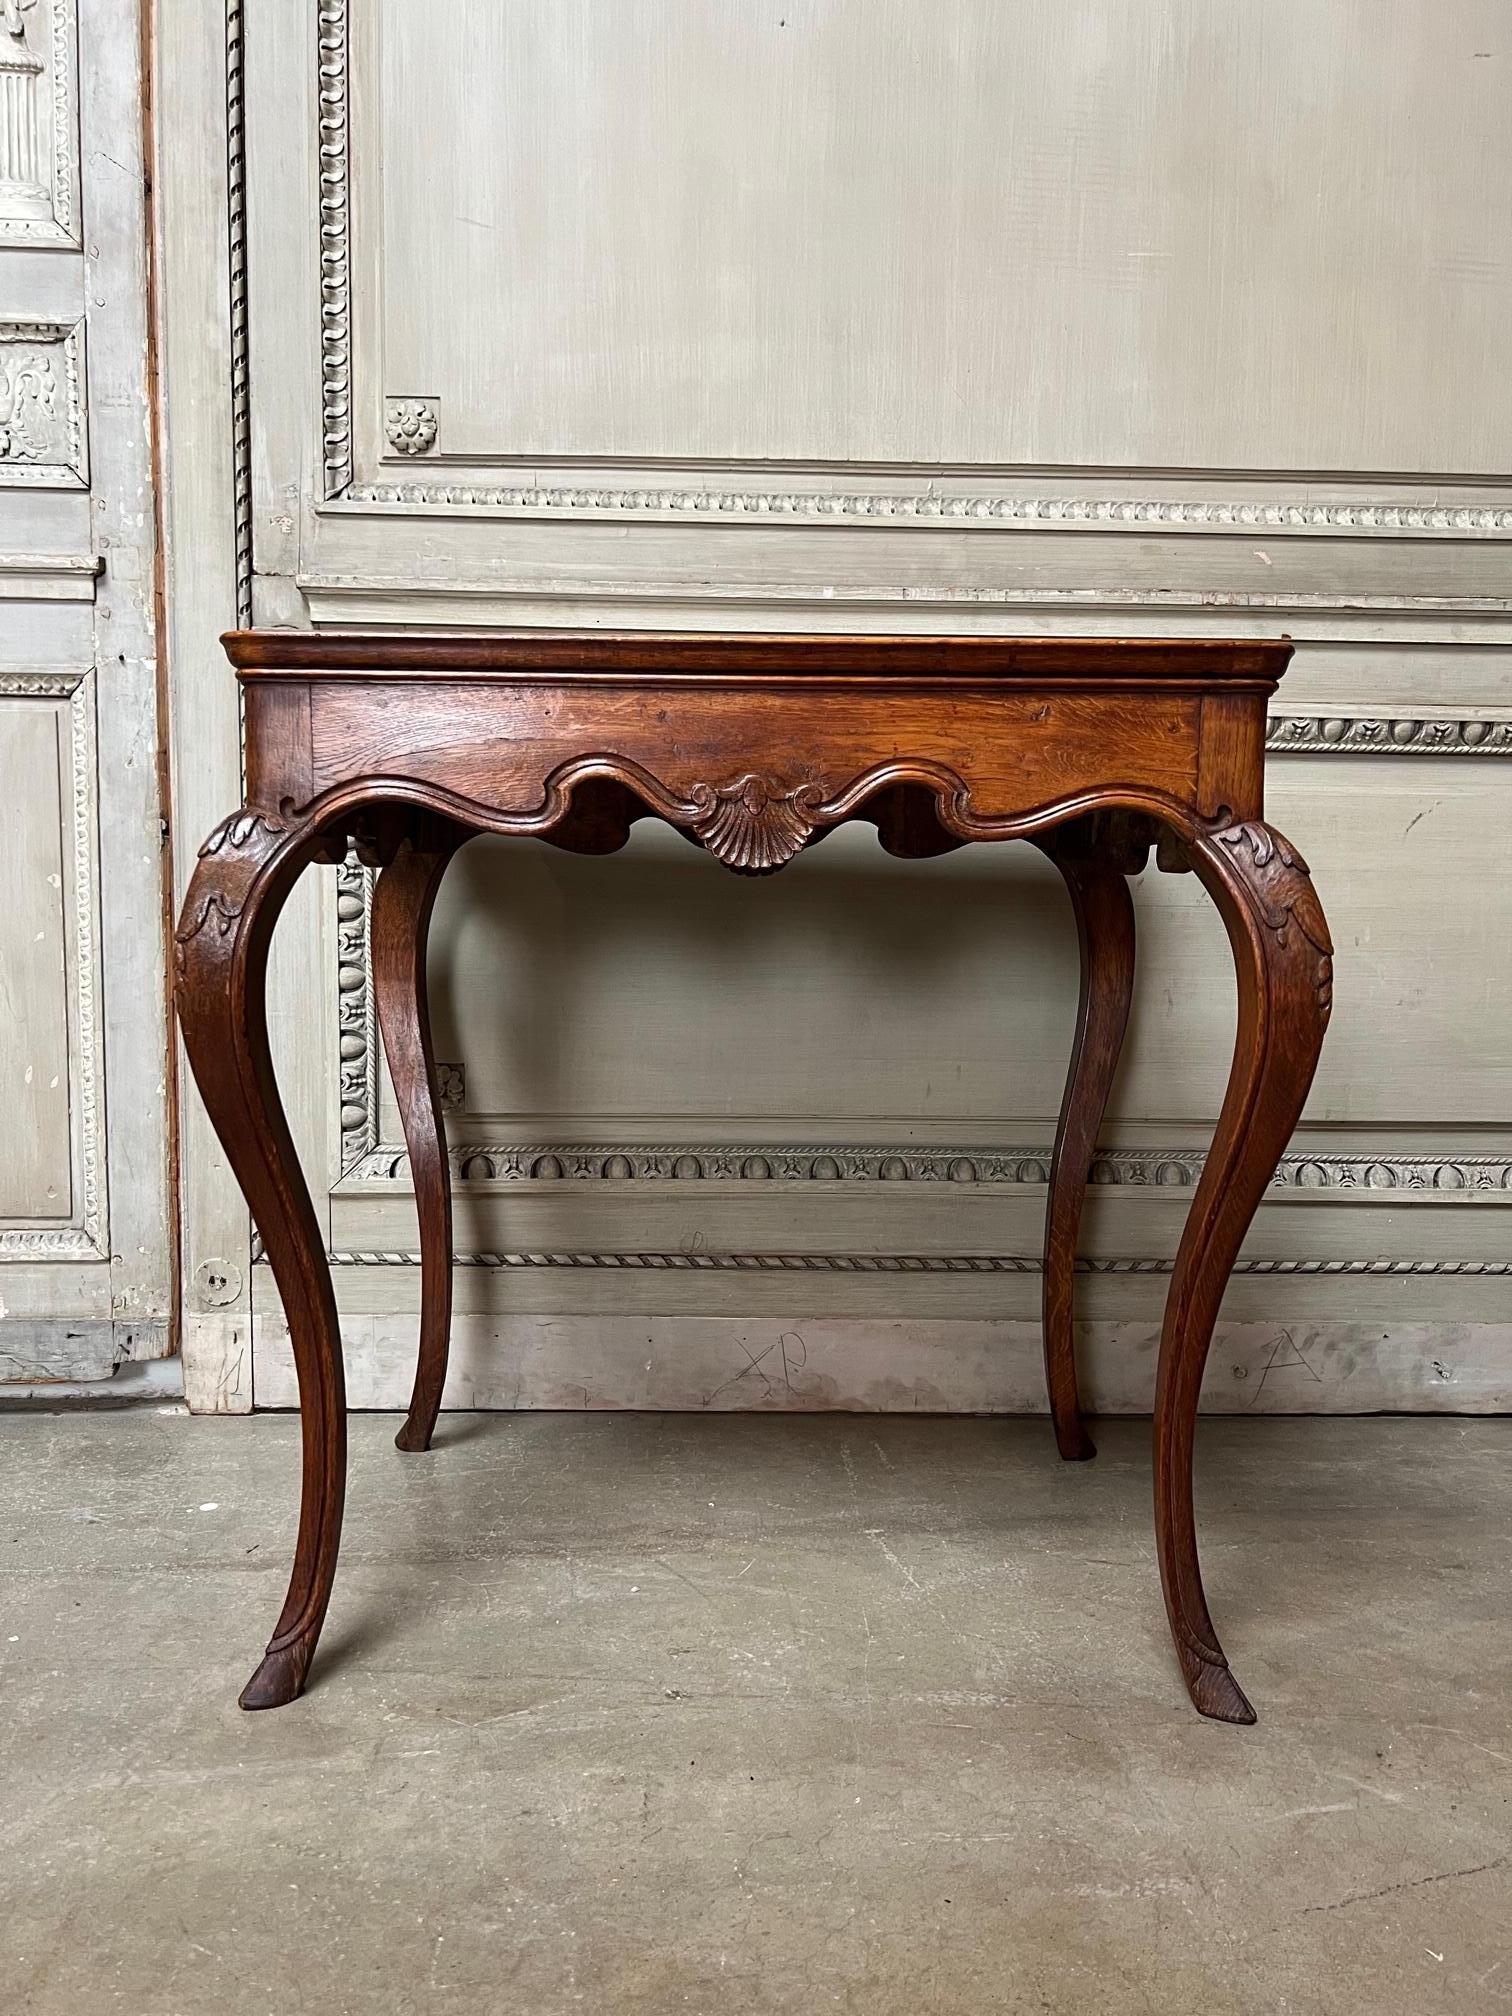 A fine French Louis XV style carved oak table with robust cabriole legs and carved apron. It has a lovely old patina dating from the mid 19th century. The table has a very special and unique top of a recessed parquetry design of 35 different marble